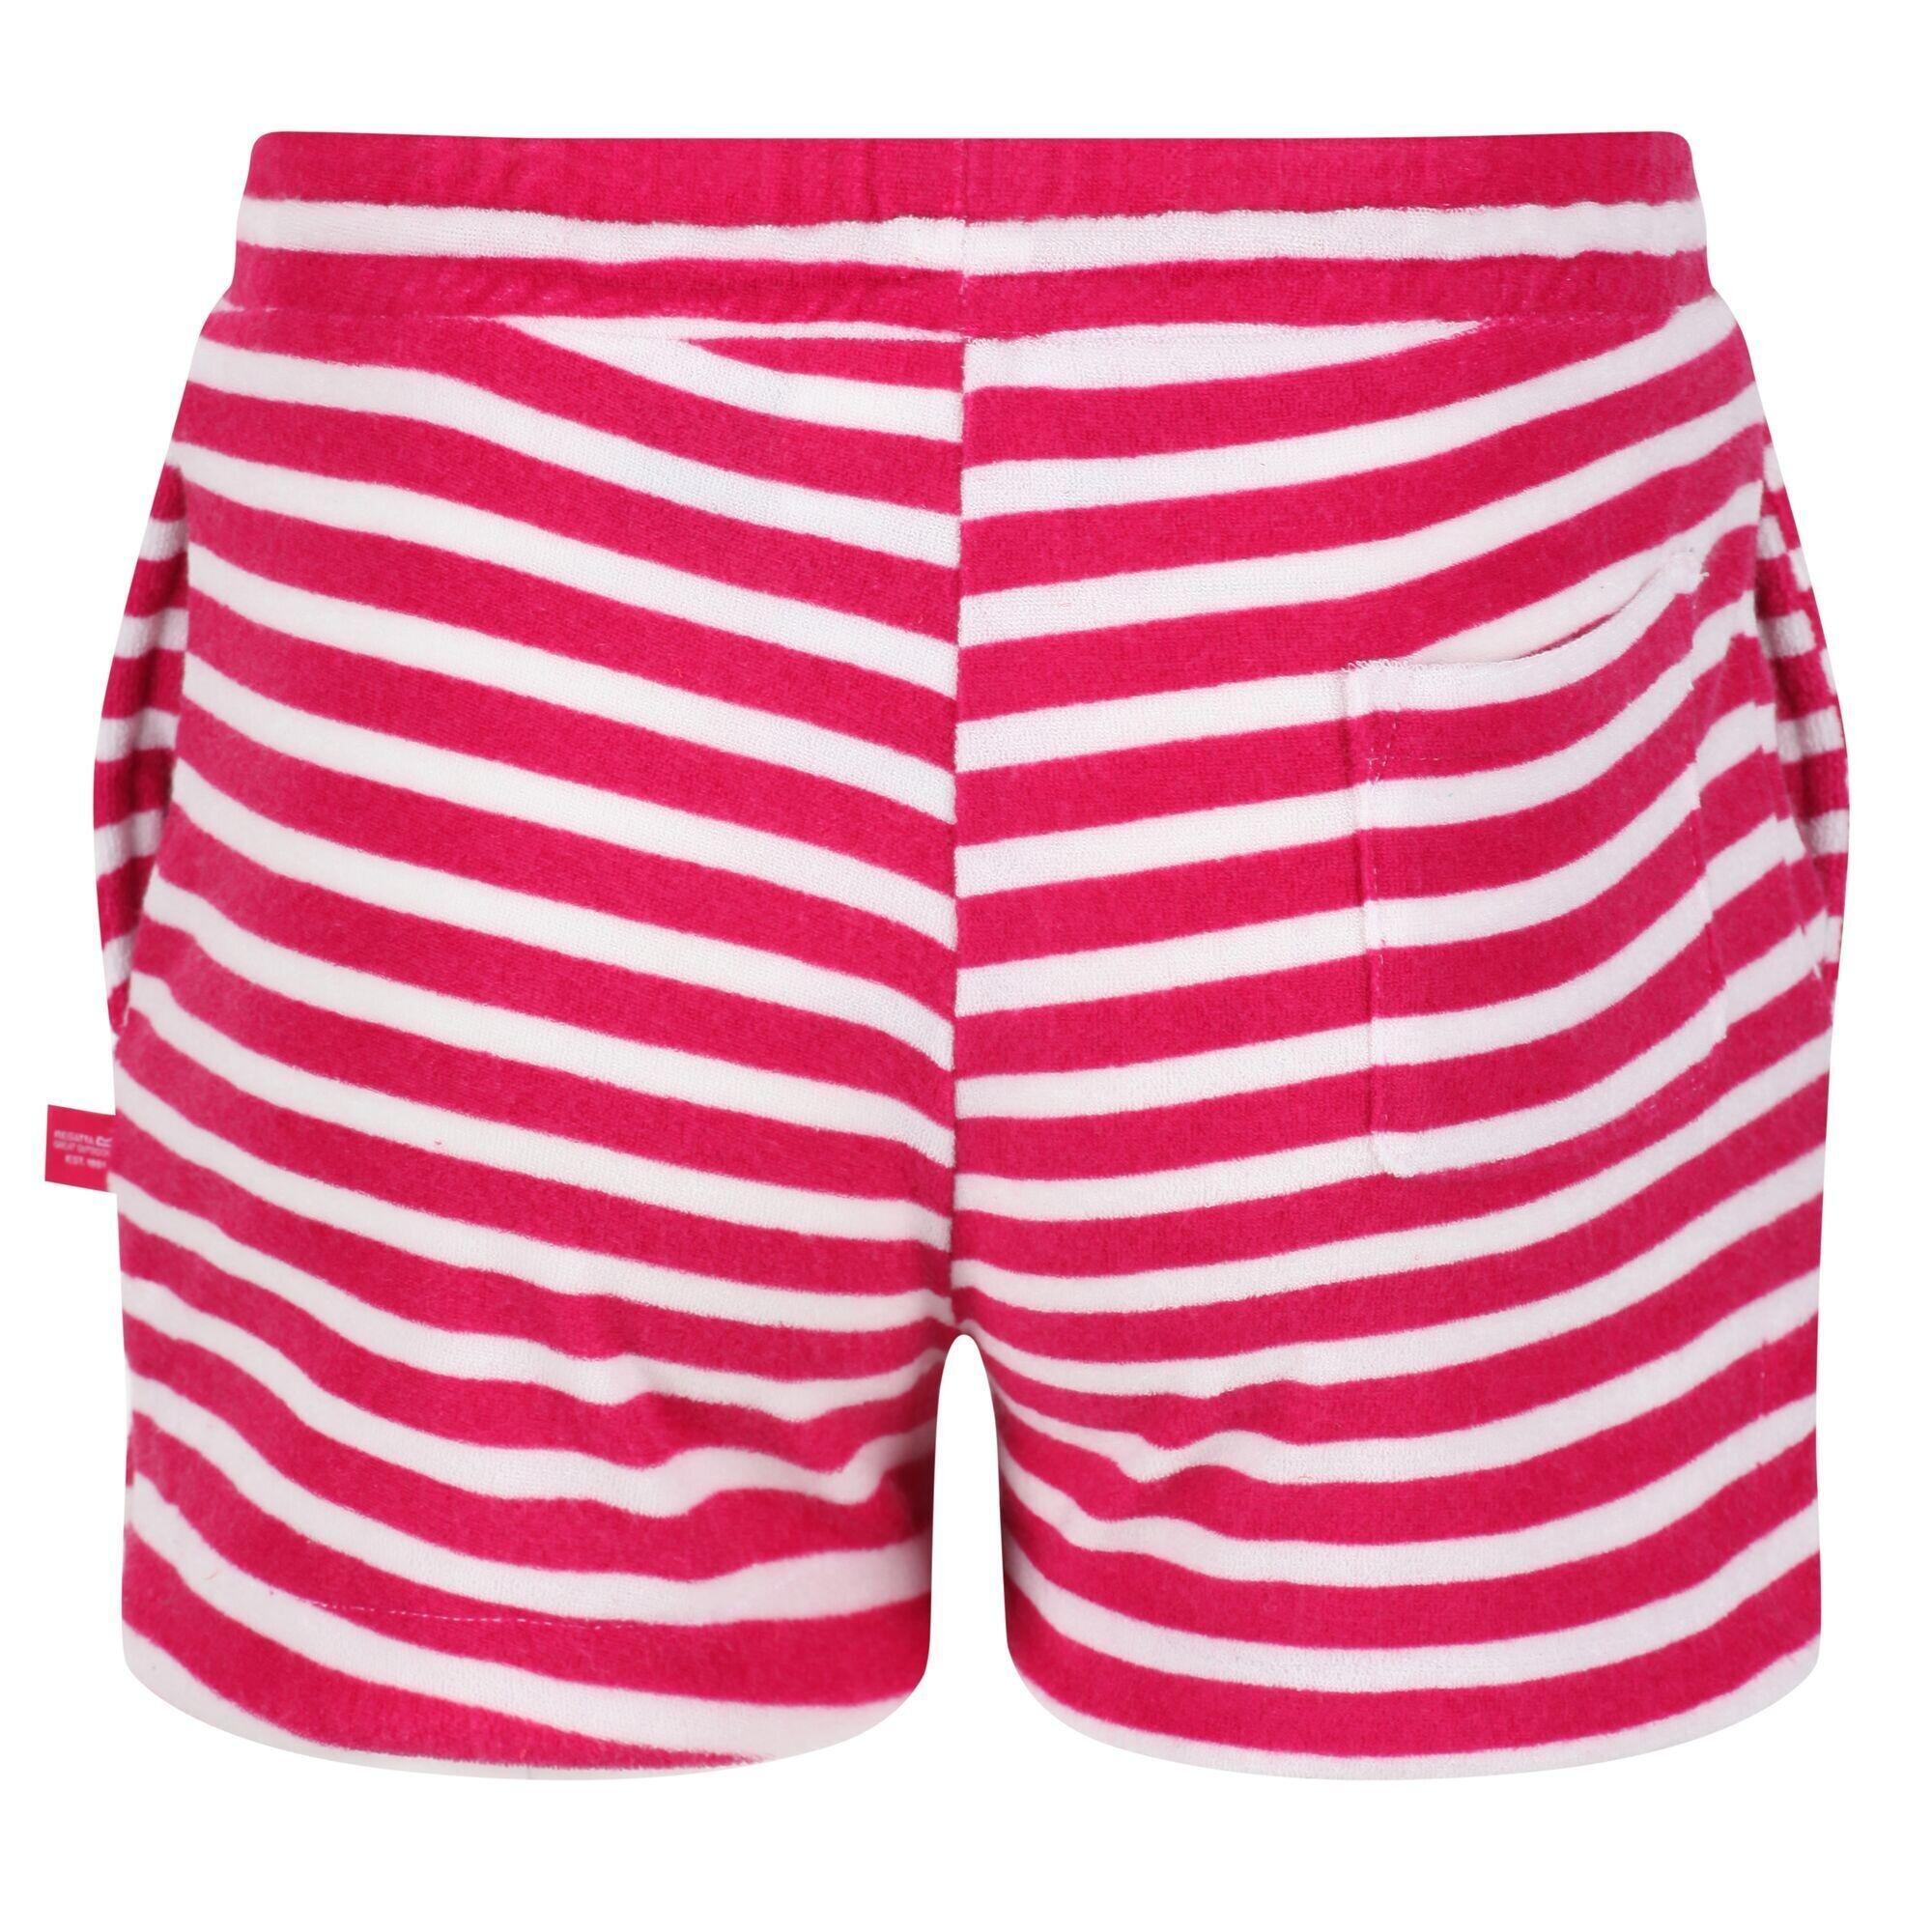 Childrens/Kids Dayana Towelling Stripe Casual Shorts (Pink Fusion/White) 2/5